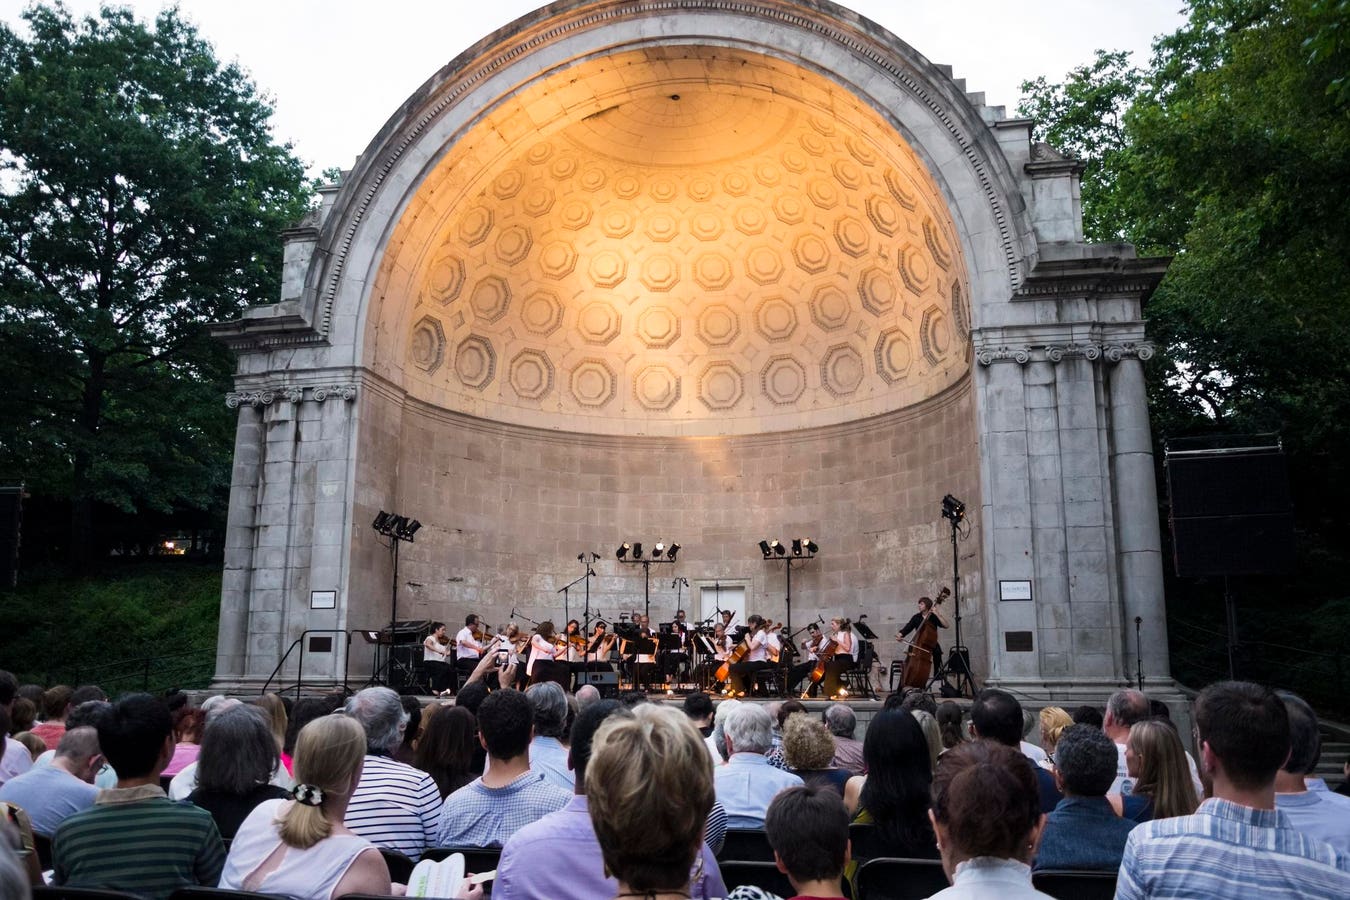 Orchestral Concerts Return To Central Park’s Naumburg Bandshell